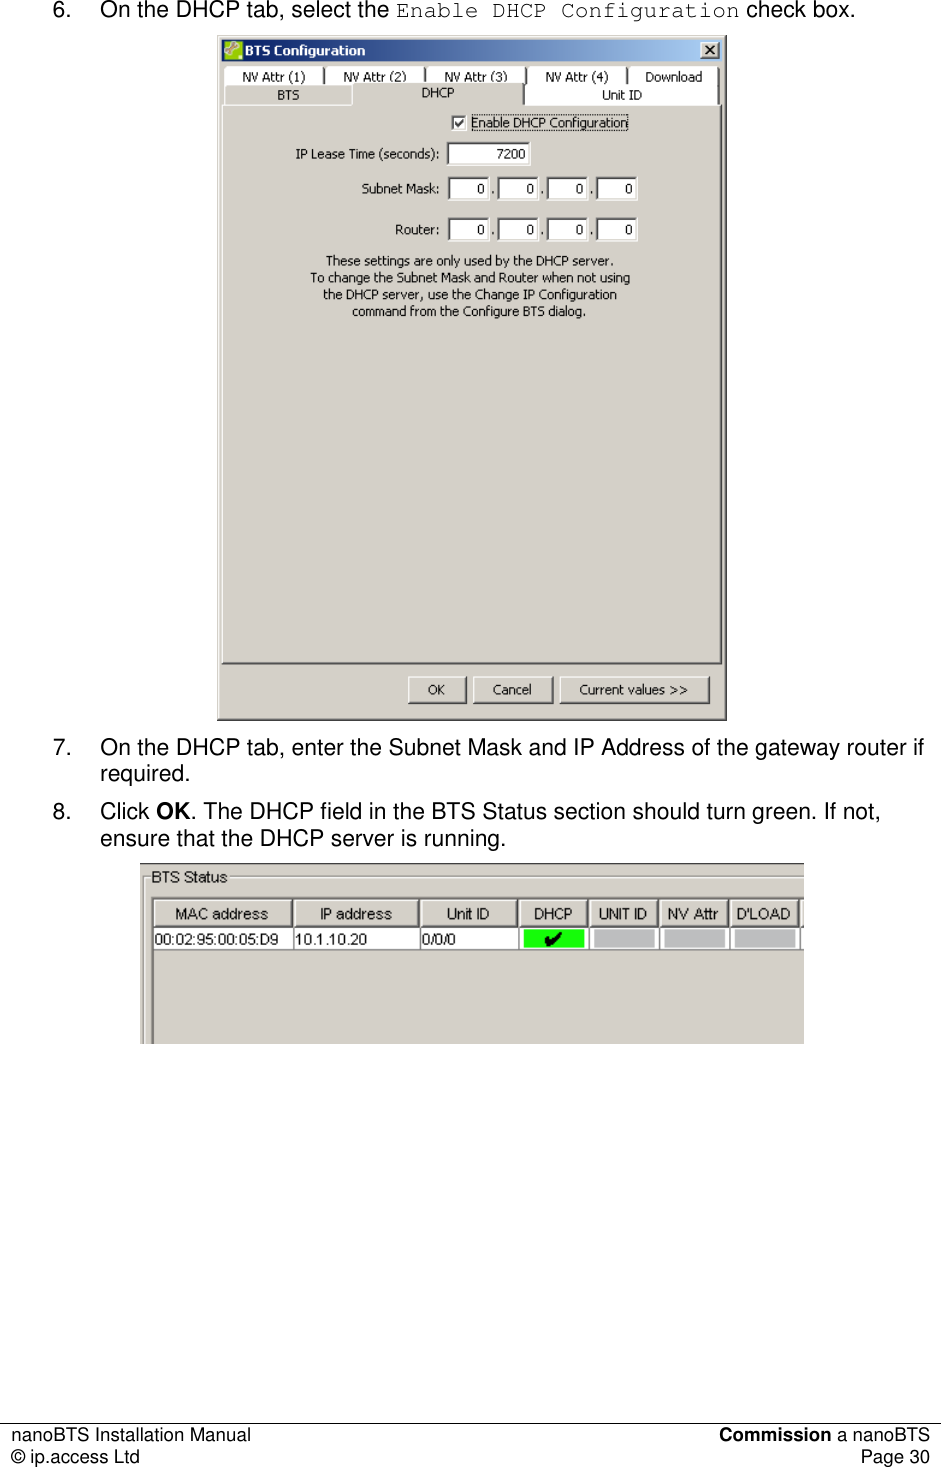 nanoBTS Installation Manual  Commission a nanoBTS © ip.access Ltd  Page 30  6.  On the DHCP tab, select the Enable DHCP Configuration check box.  7.  On the DHCP tab, enter the Subnet Mask and IP Address of the gateway router if required. 8.  Click OK. The DHCP field in the BTS Status section should turn green. If not, ensure that the DHCP server is running.        